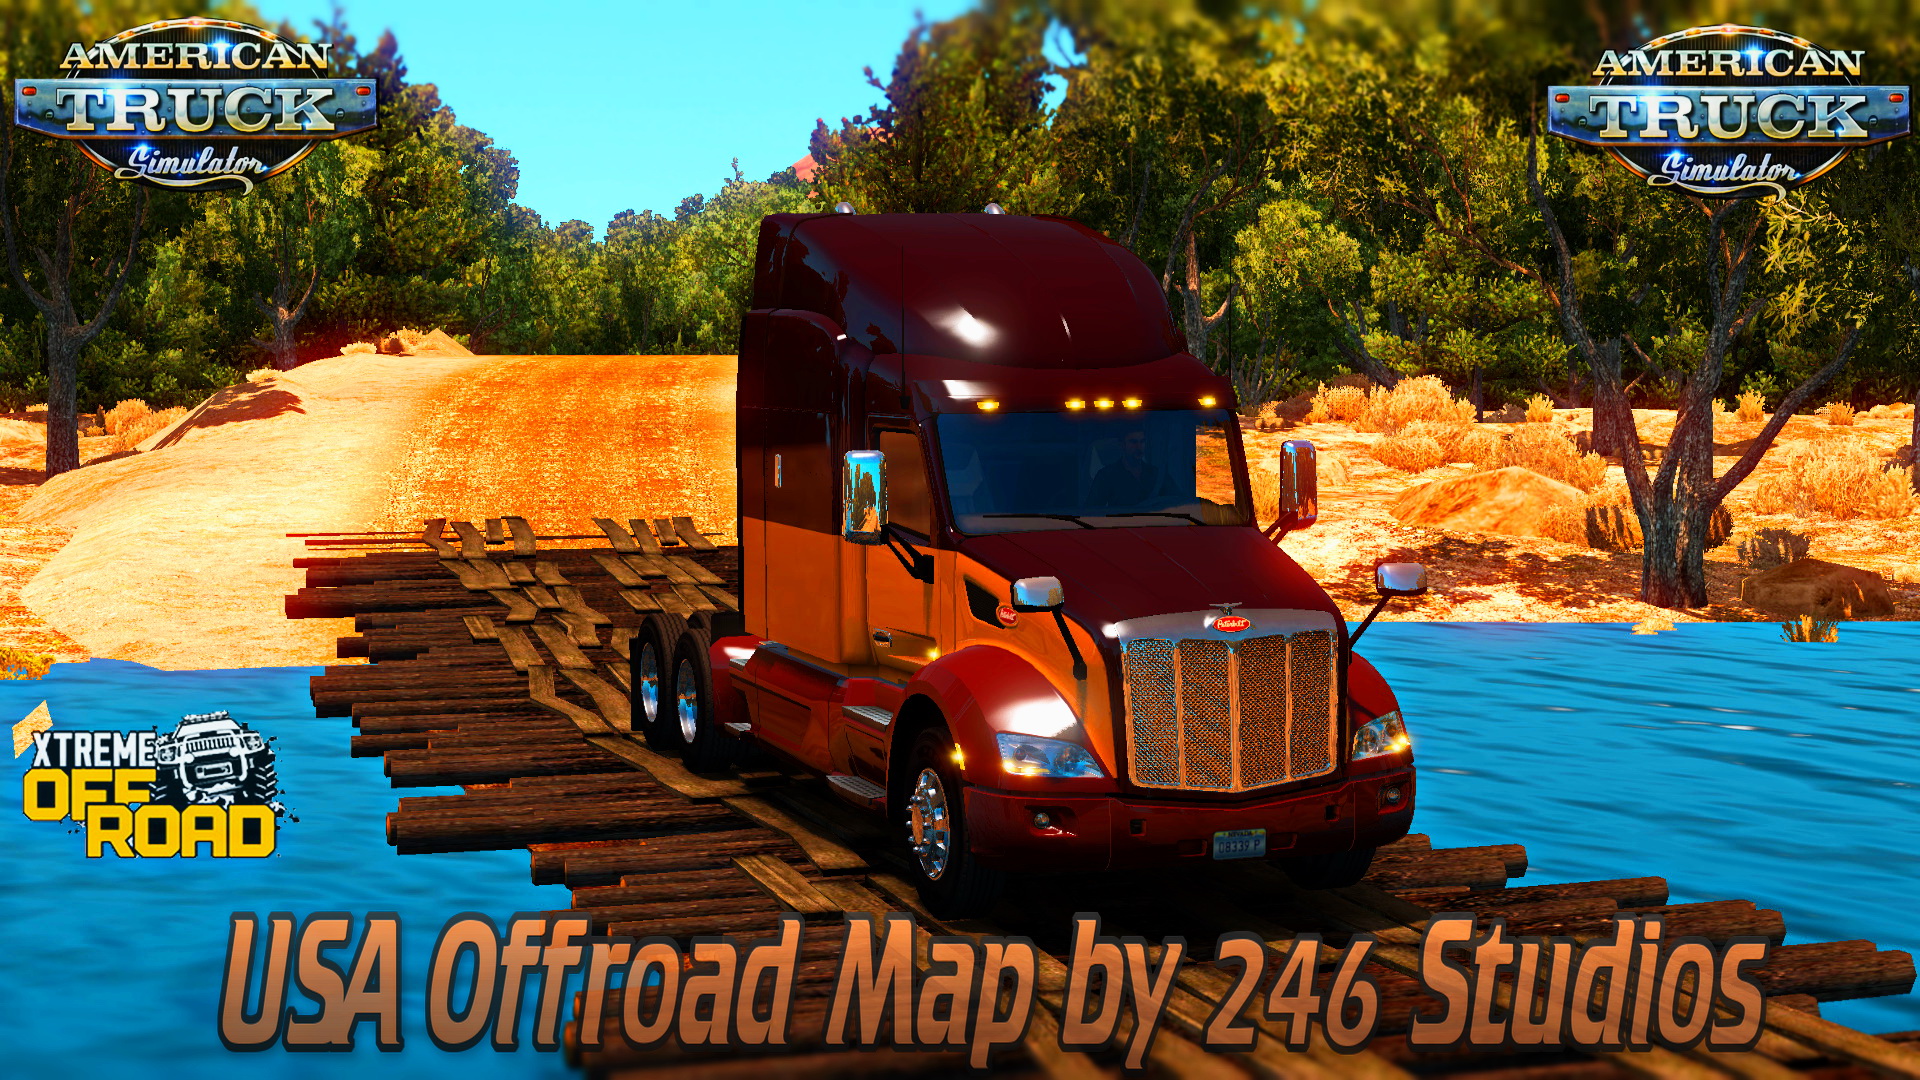 USA Offroad Map by 246 Studios for ATS (American Truck Simulator)